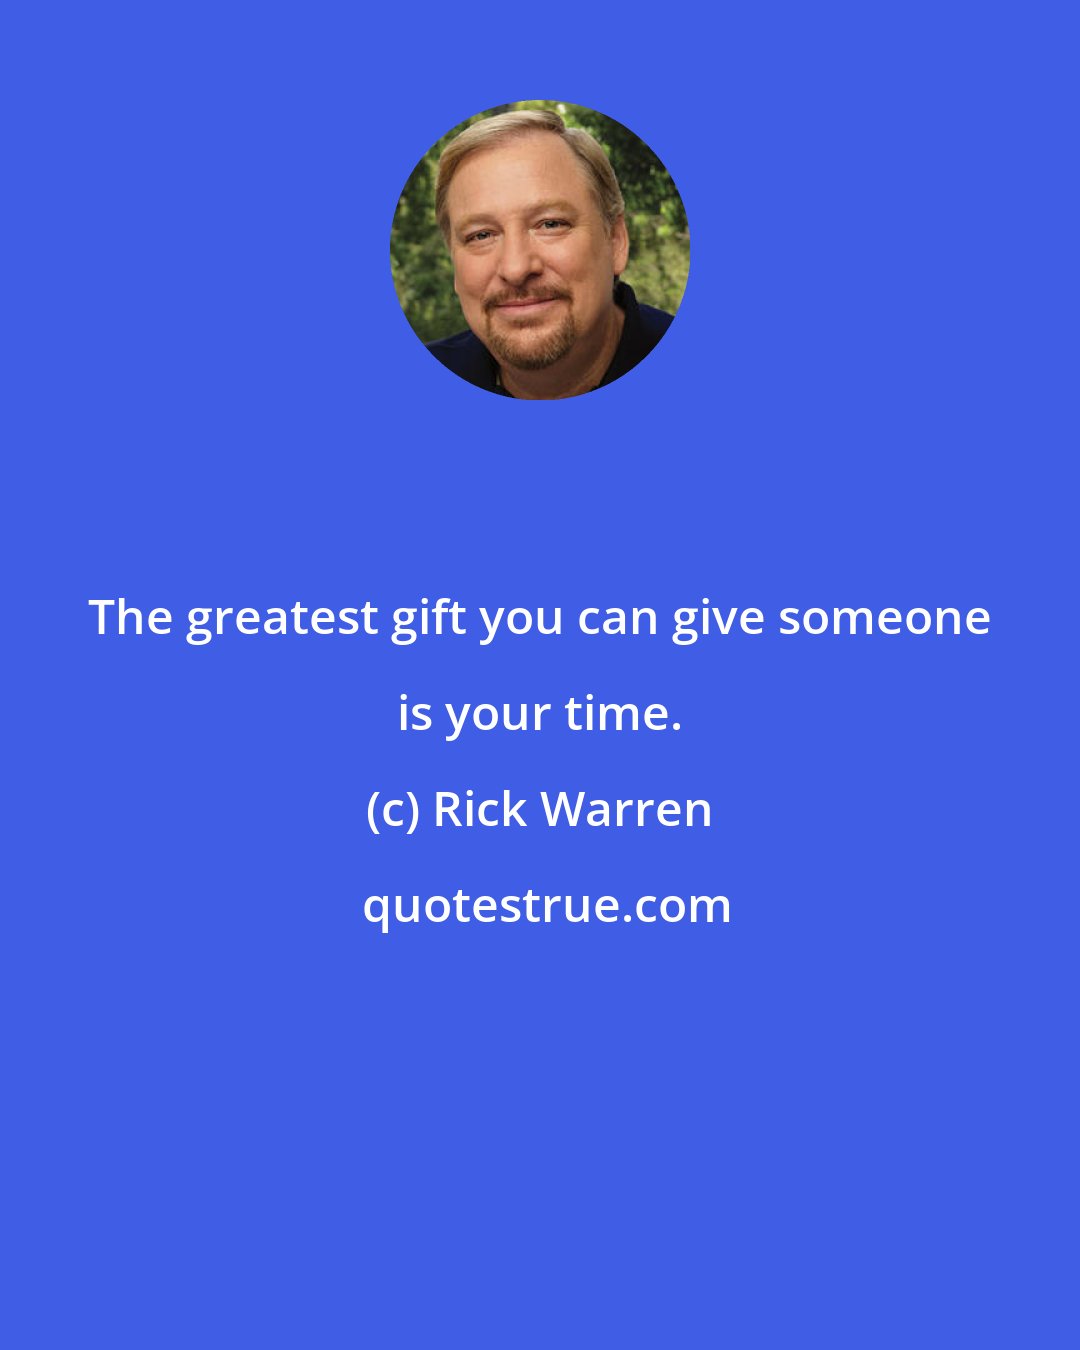 Rick Warren: The greatest gift you can give someone is your time.